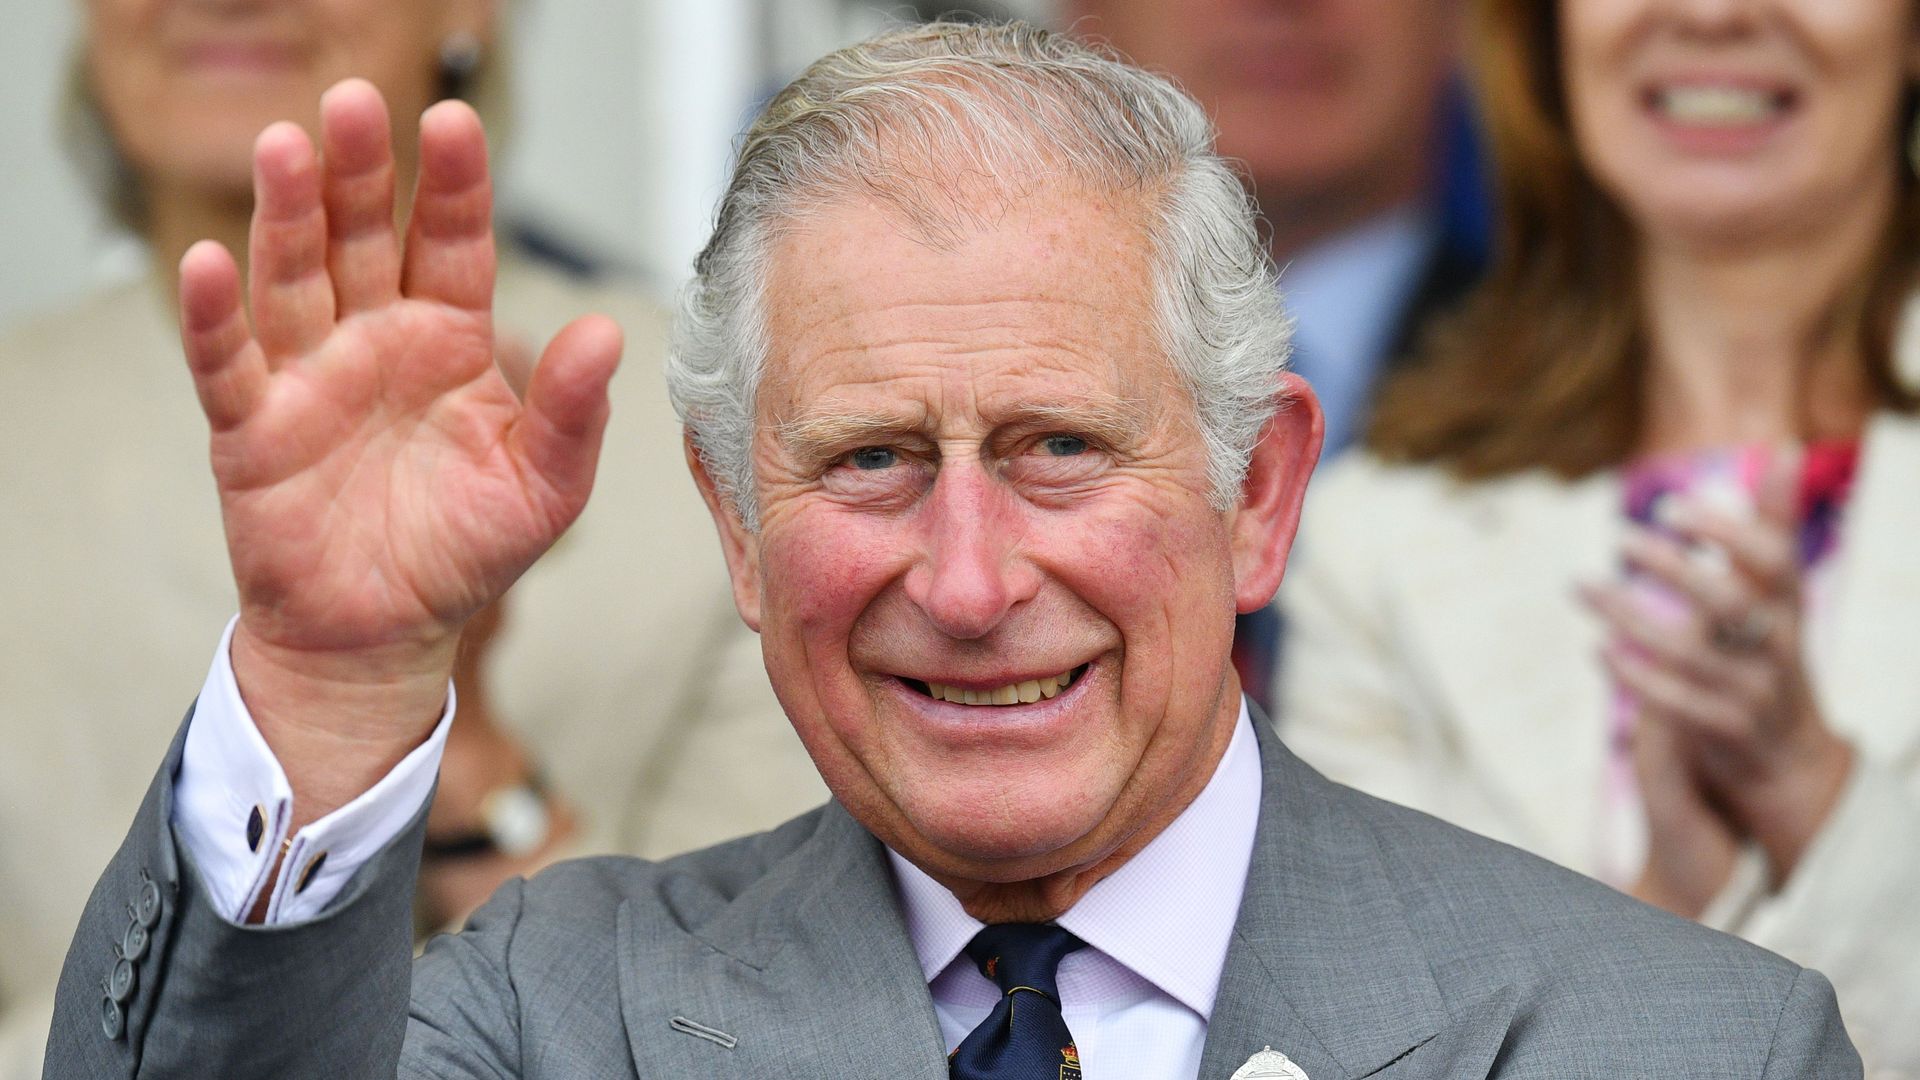 King Charles waves to crowds in 2018